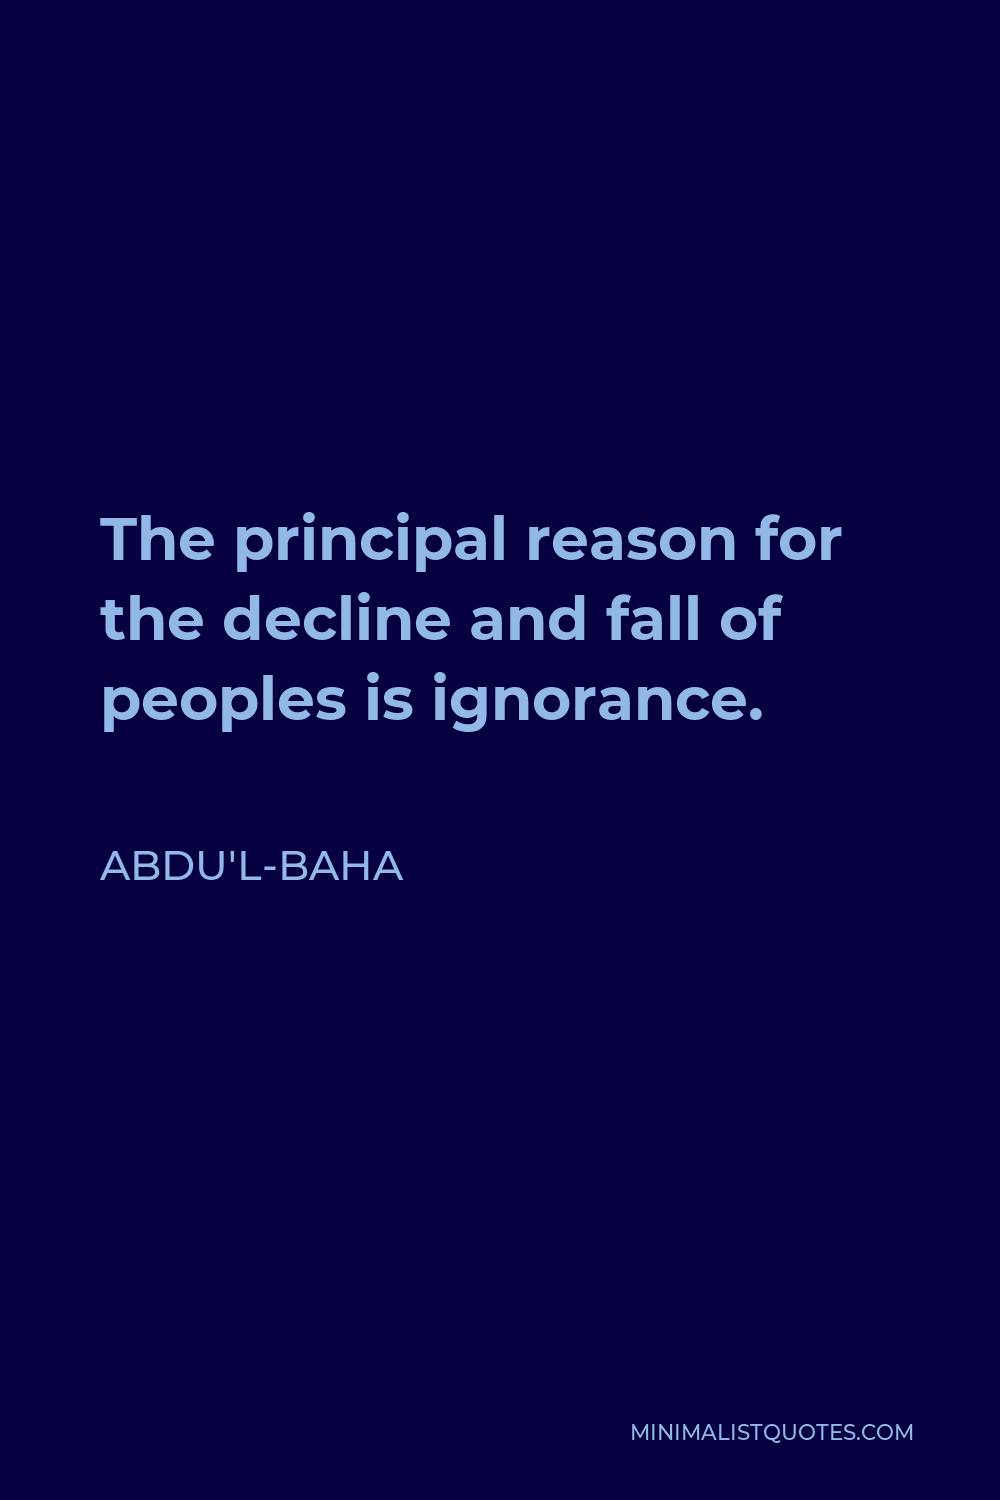 Abdu'l-Baha Quote - The principal reason for the decline and fall of peoples is ignorance.